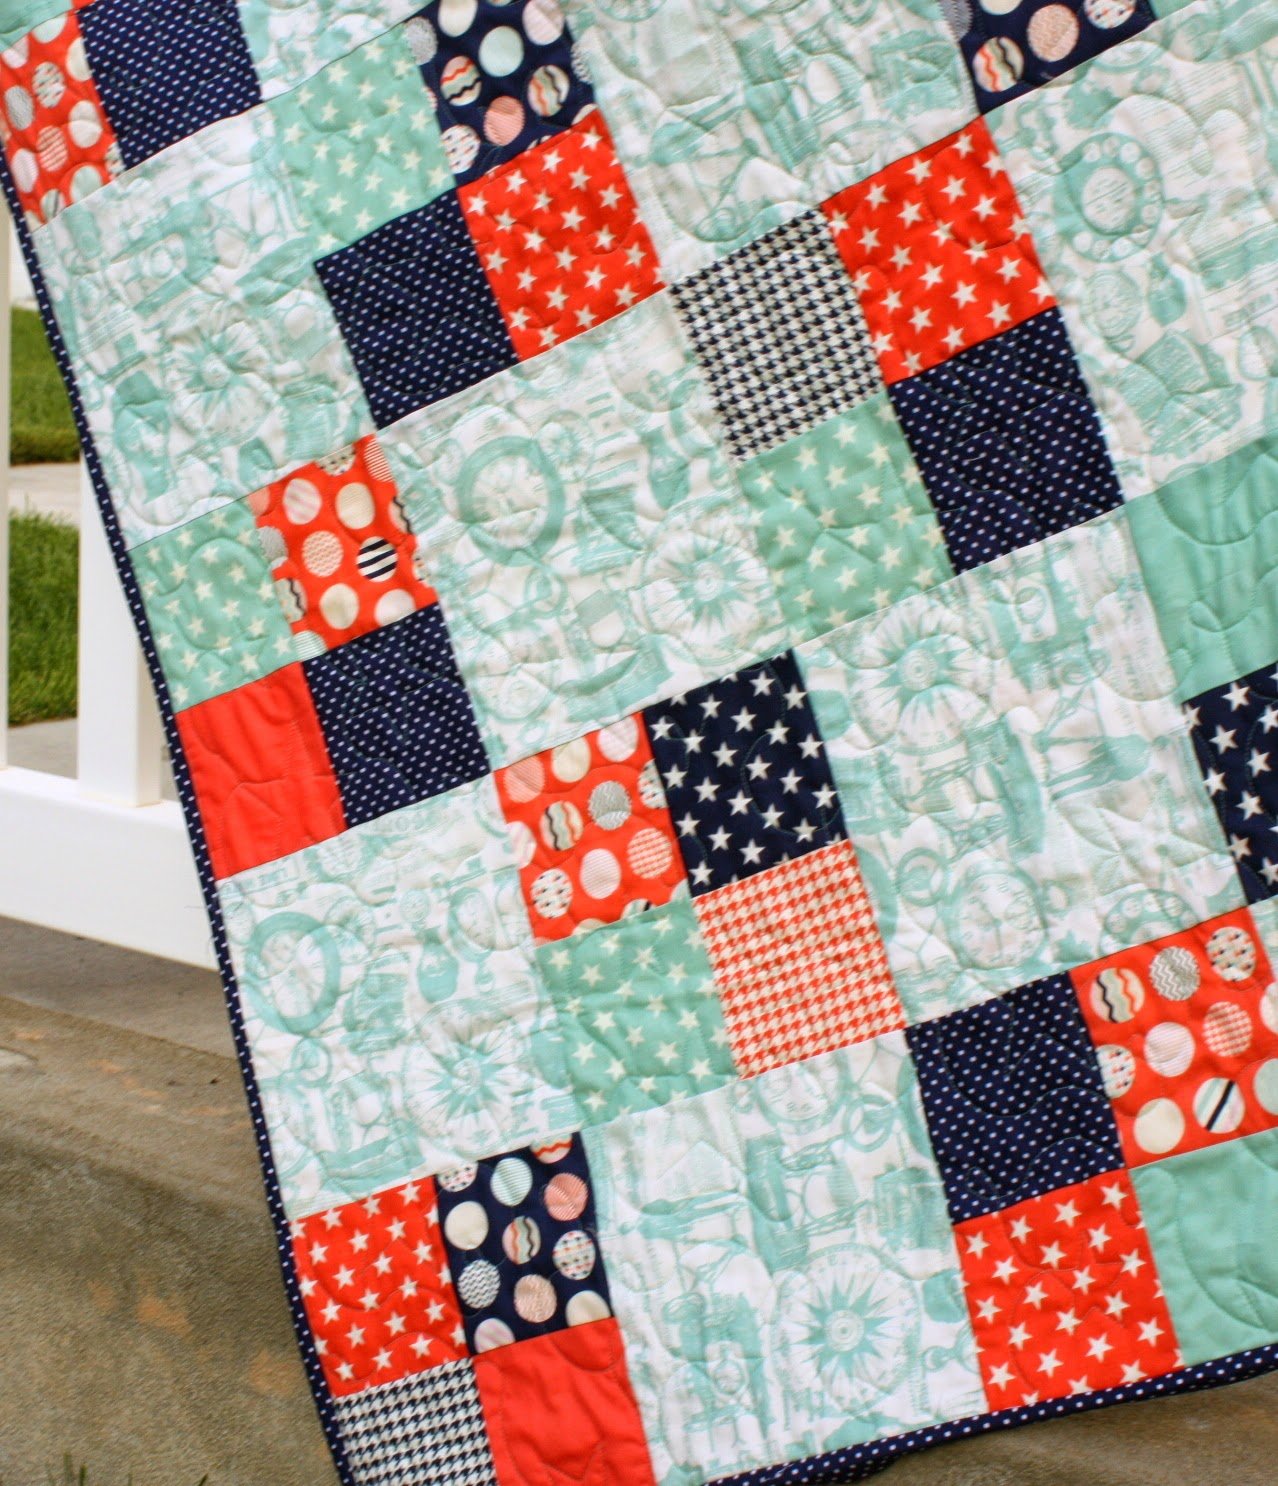 how-to-make-patchwork-quilts-24-creative-patterns-guide-patterns